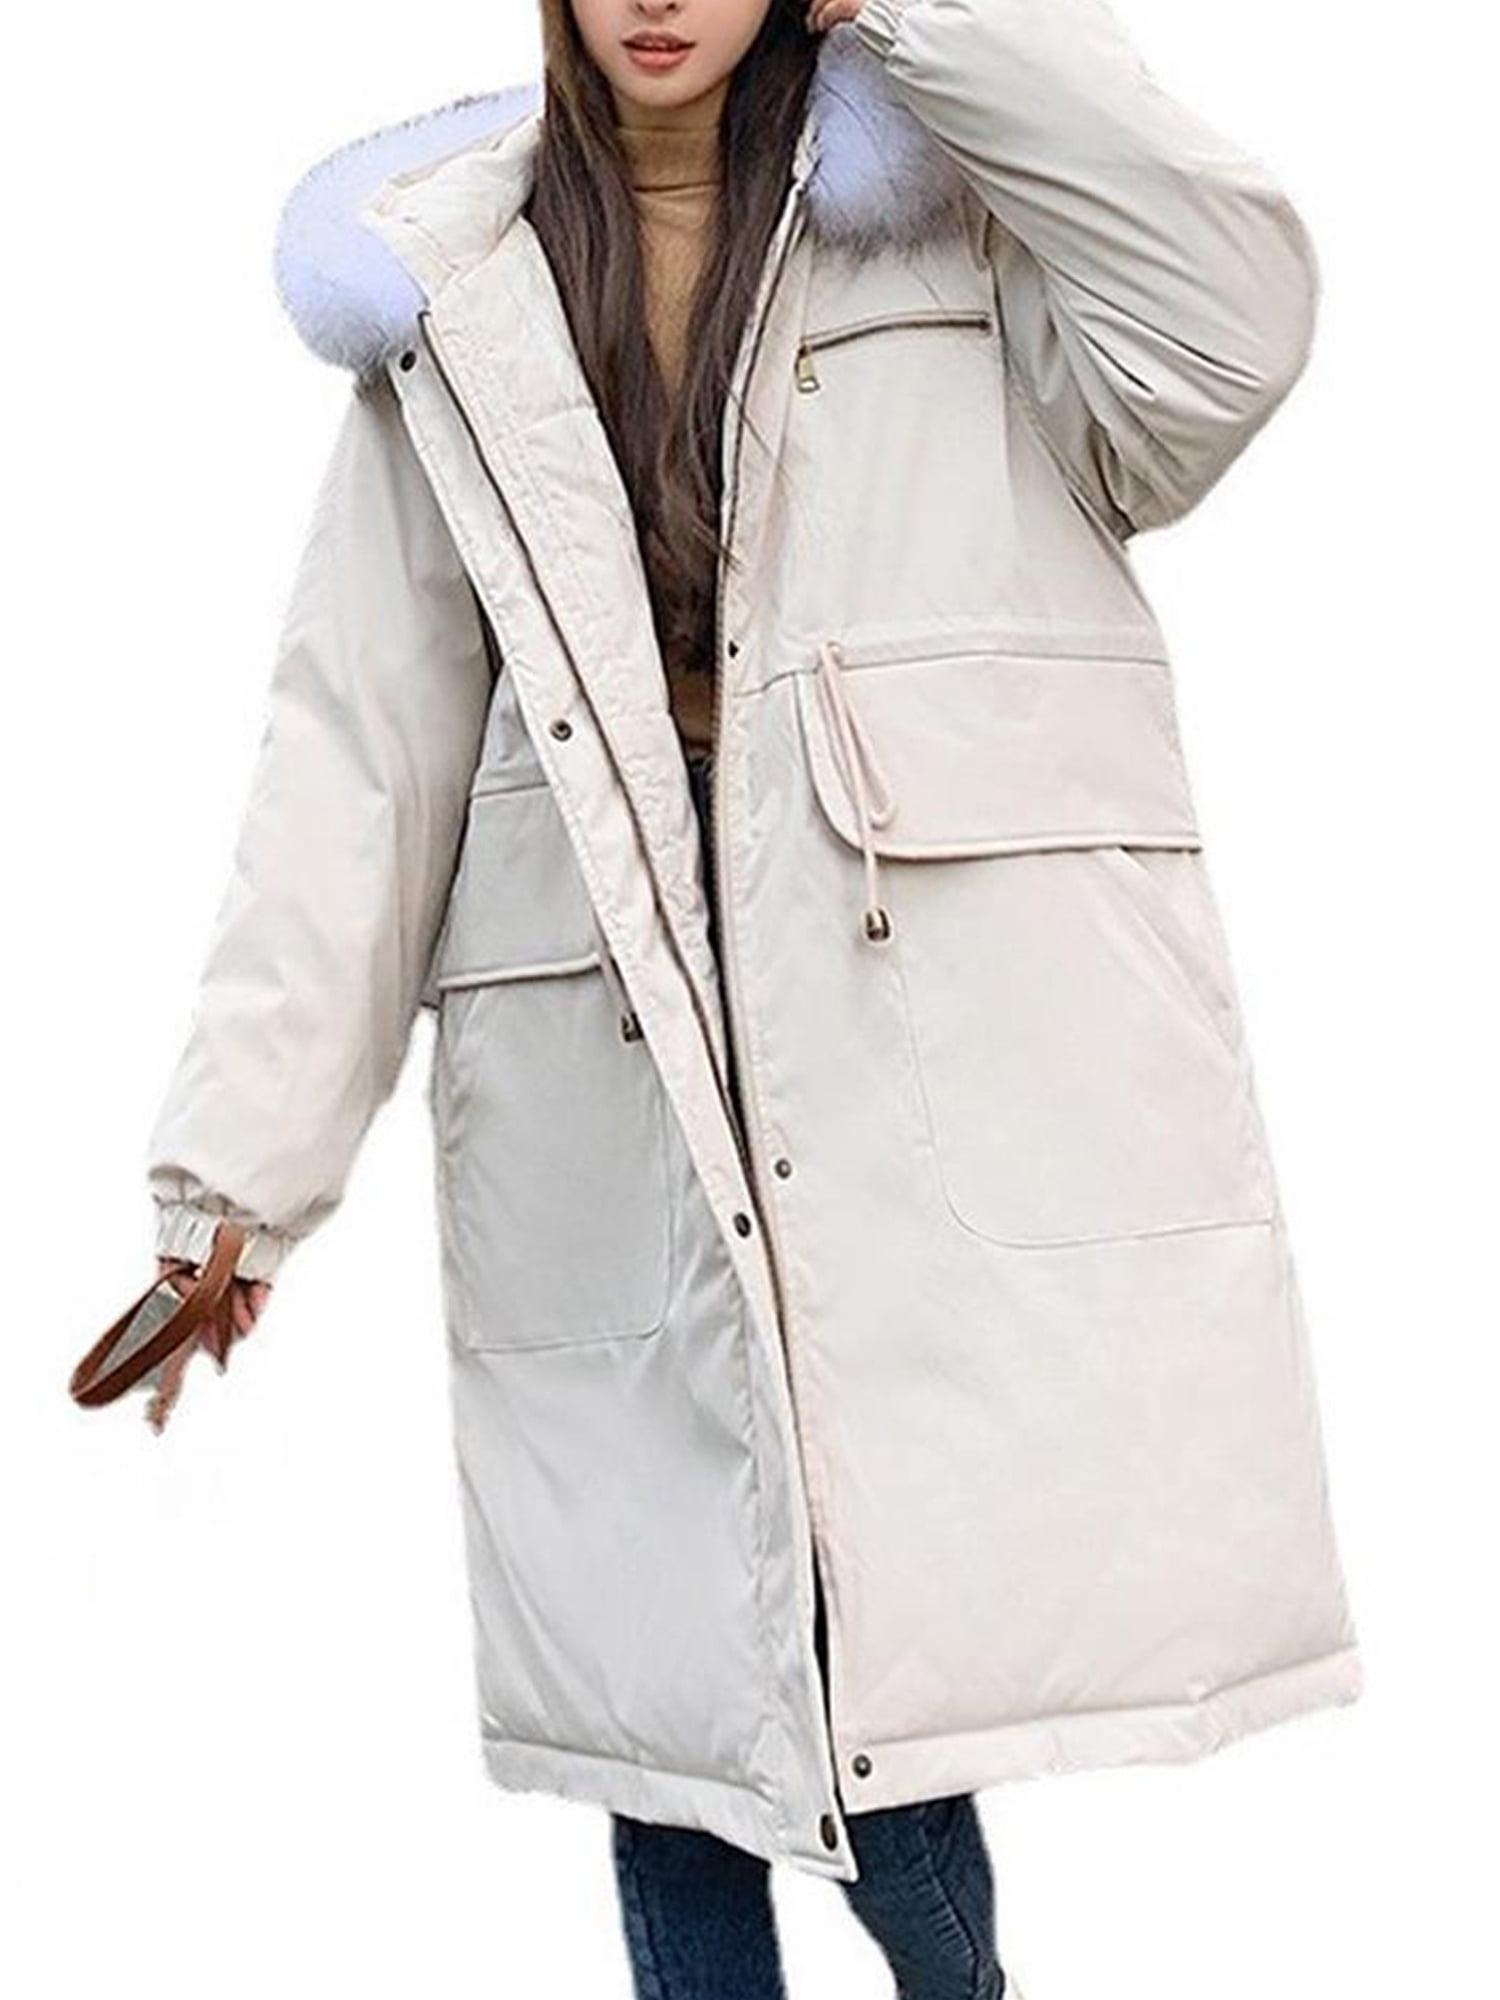 Ladies Women Long Sleeve Faux Fur Hooded Quilted Padded Winter Parka Coat Jacket 